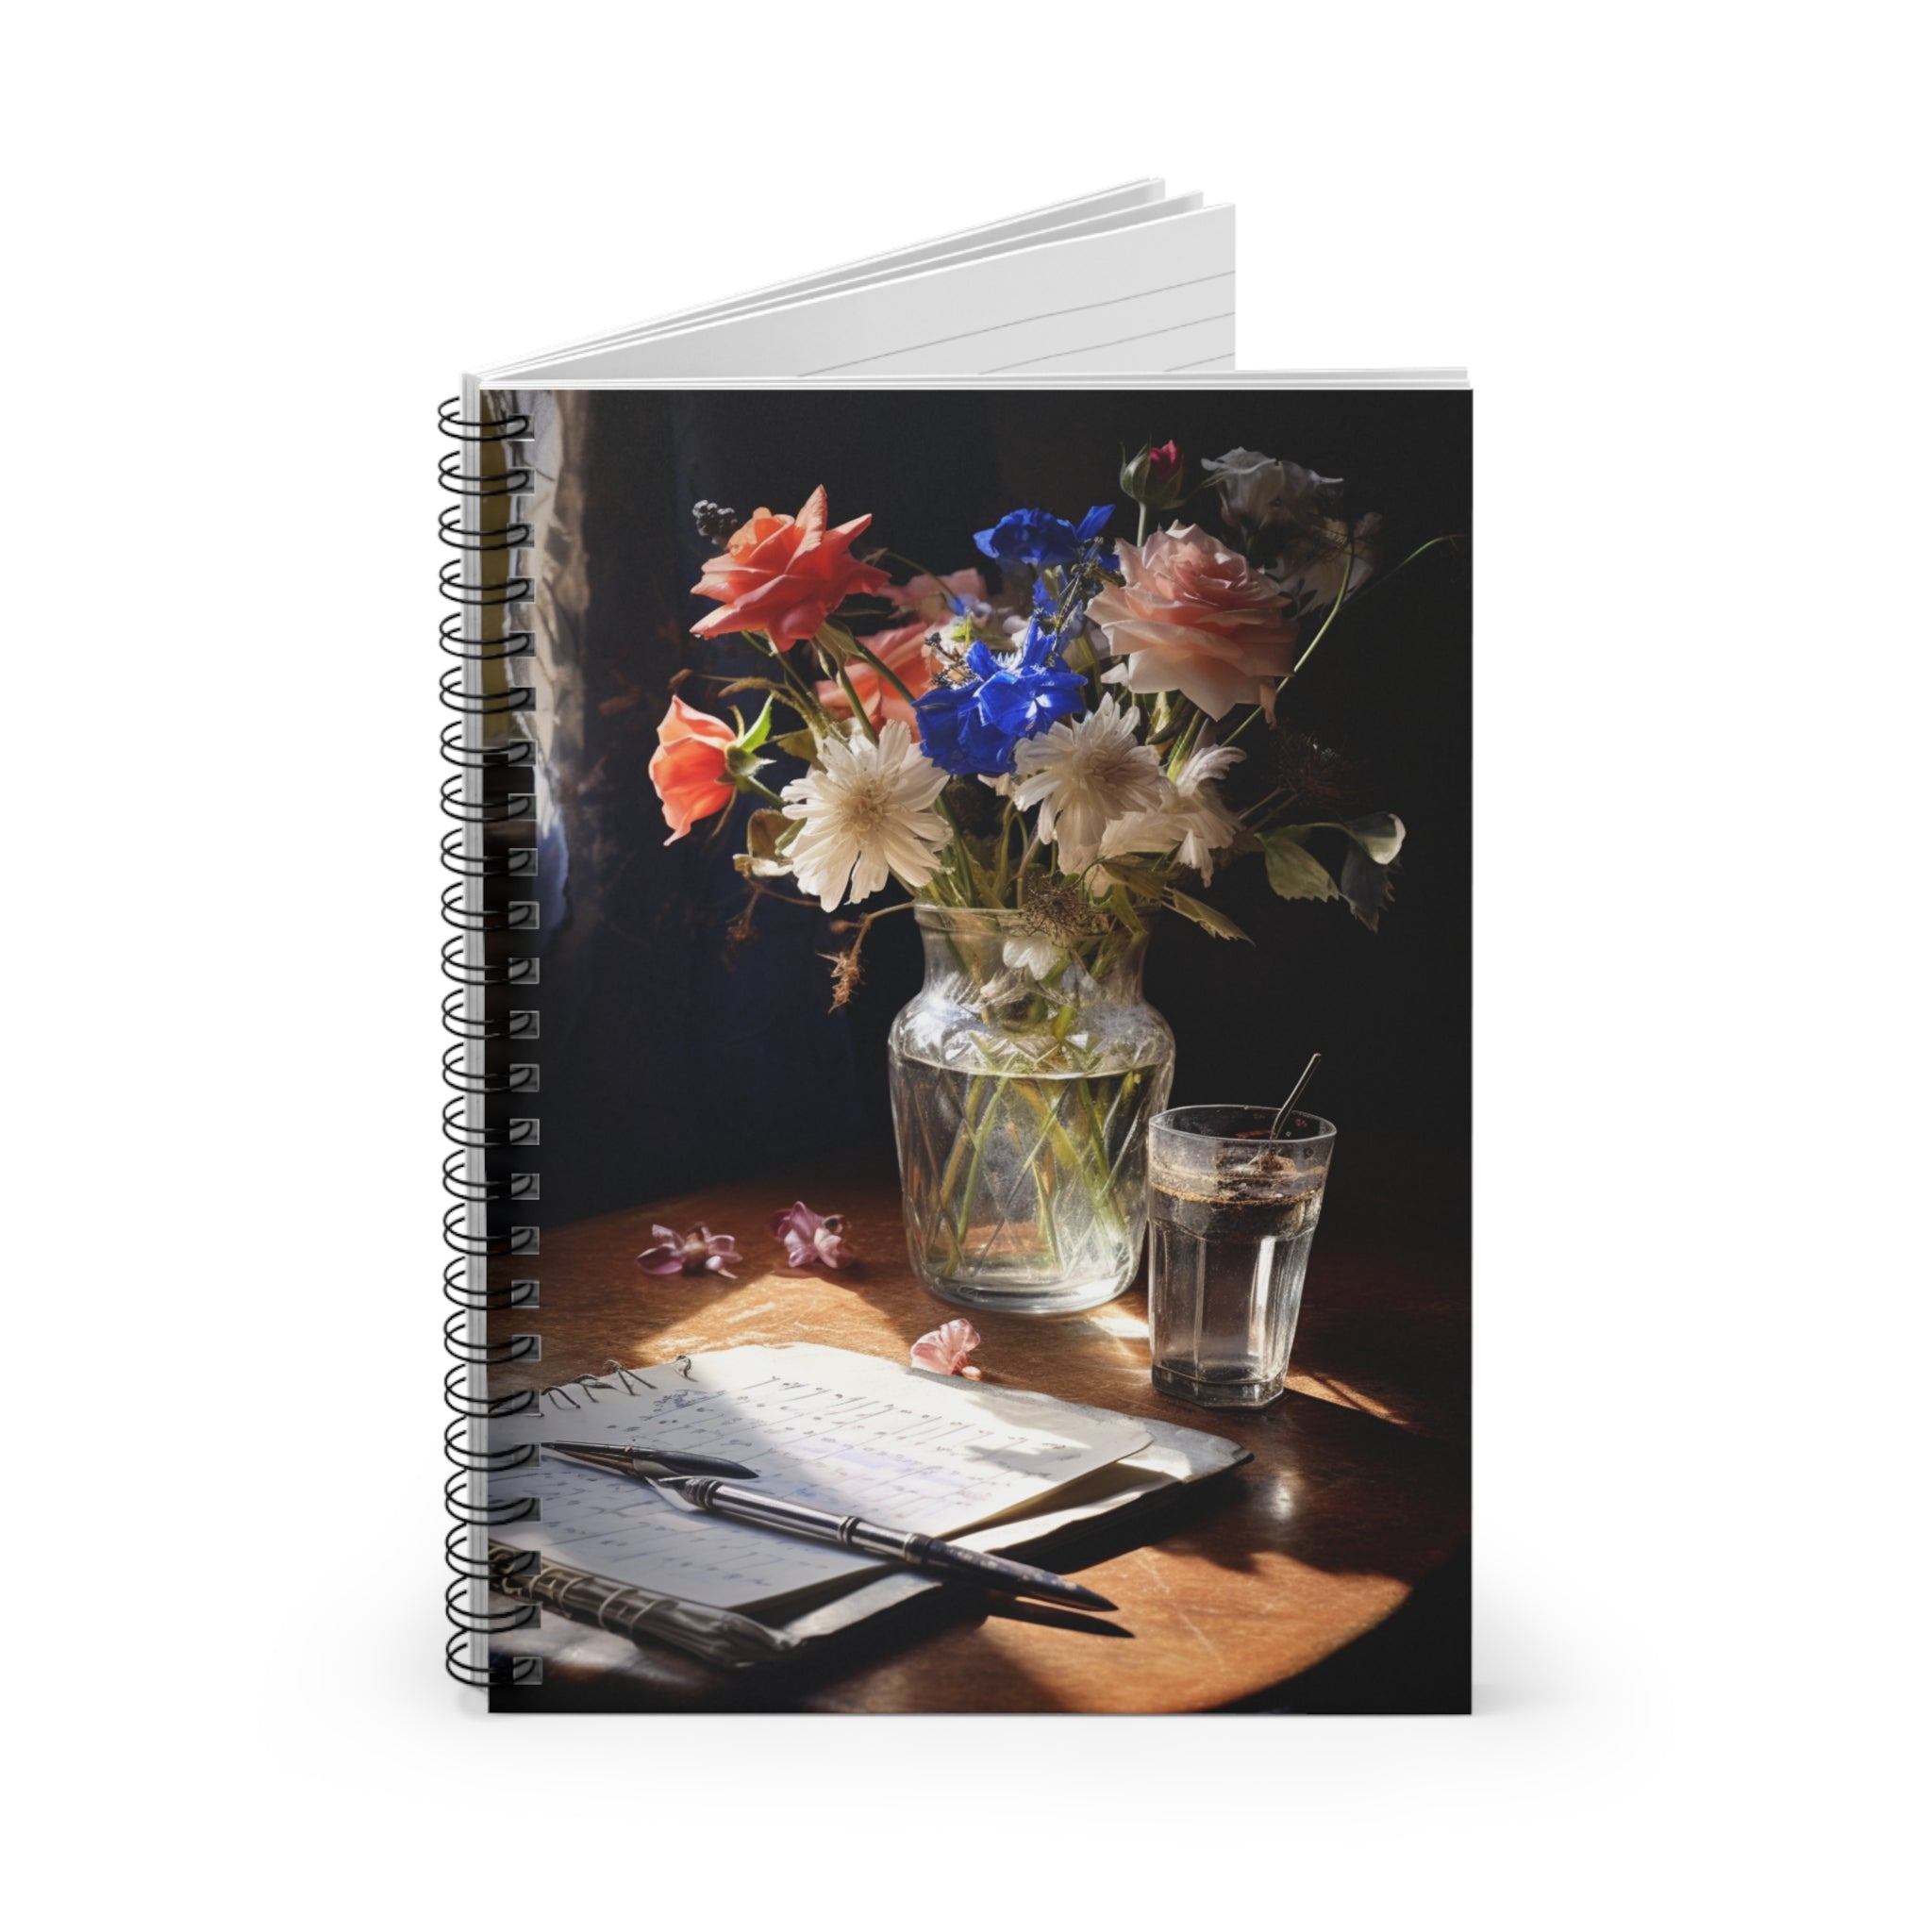 Vase of Water and Flowers - Spiral Notebook - Ruled Line - Spruced Roost